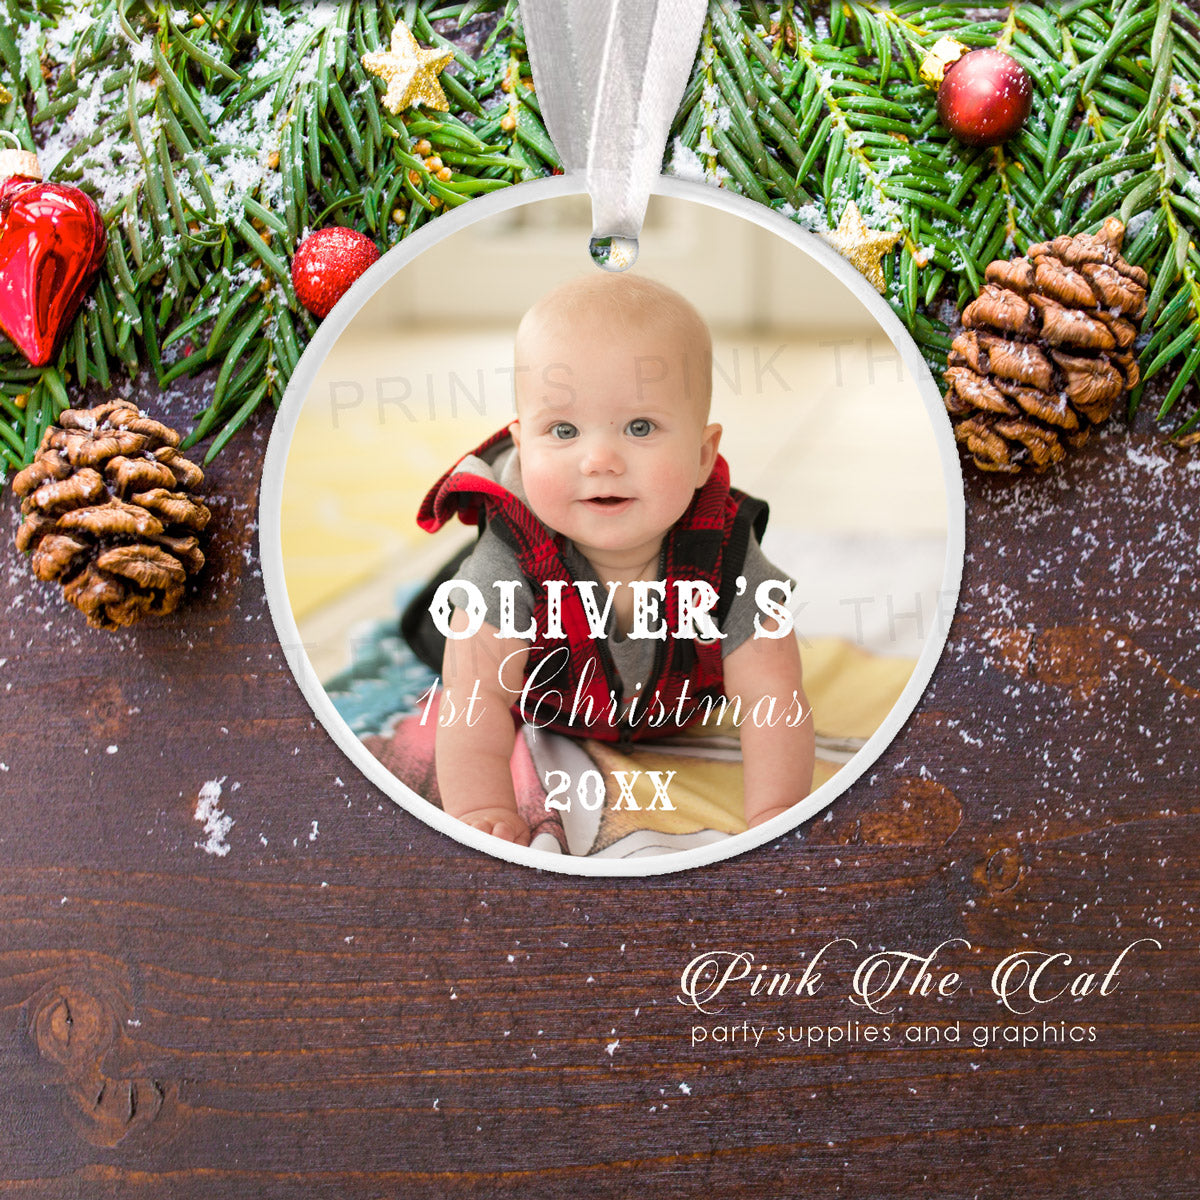 Personalized Christmas ornament with baby photo